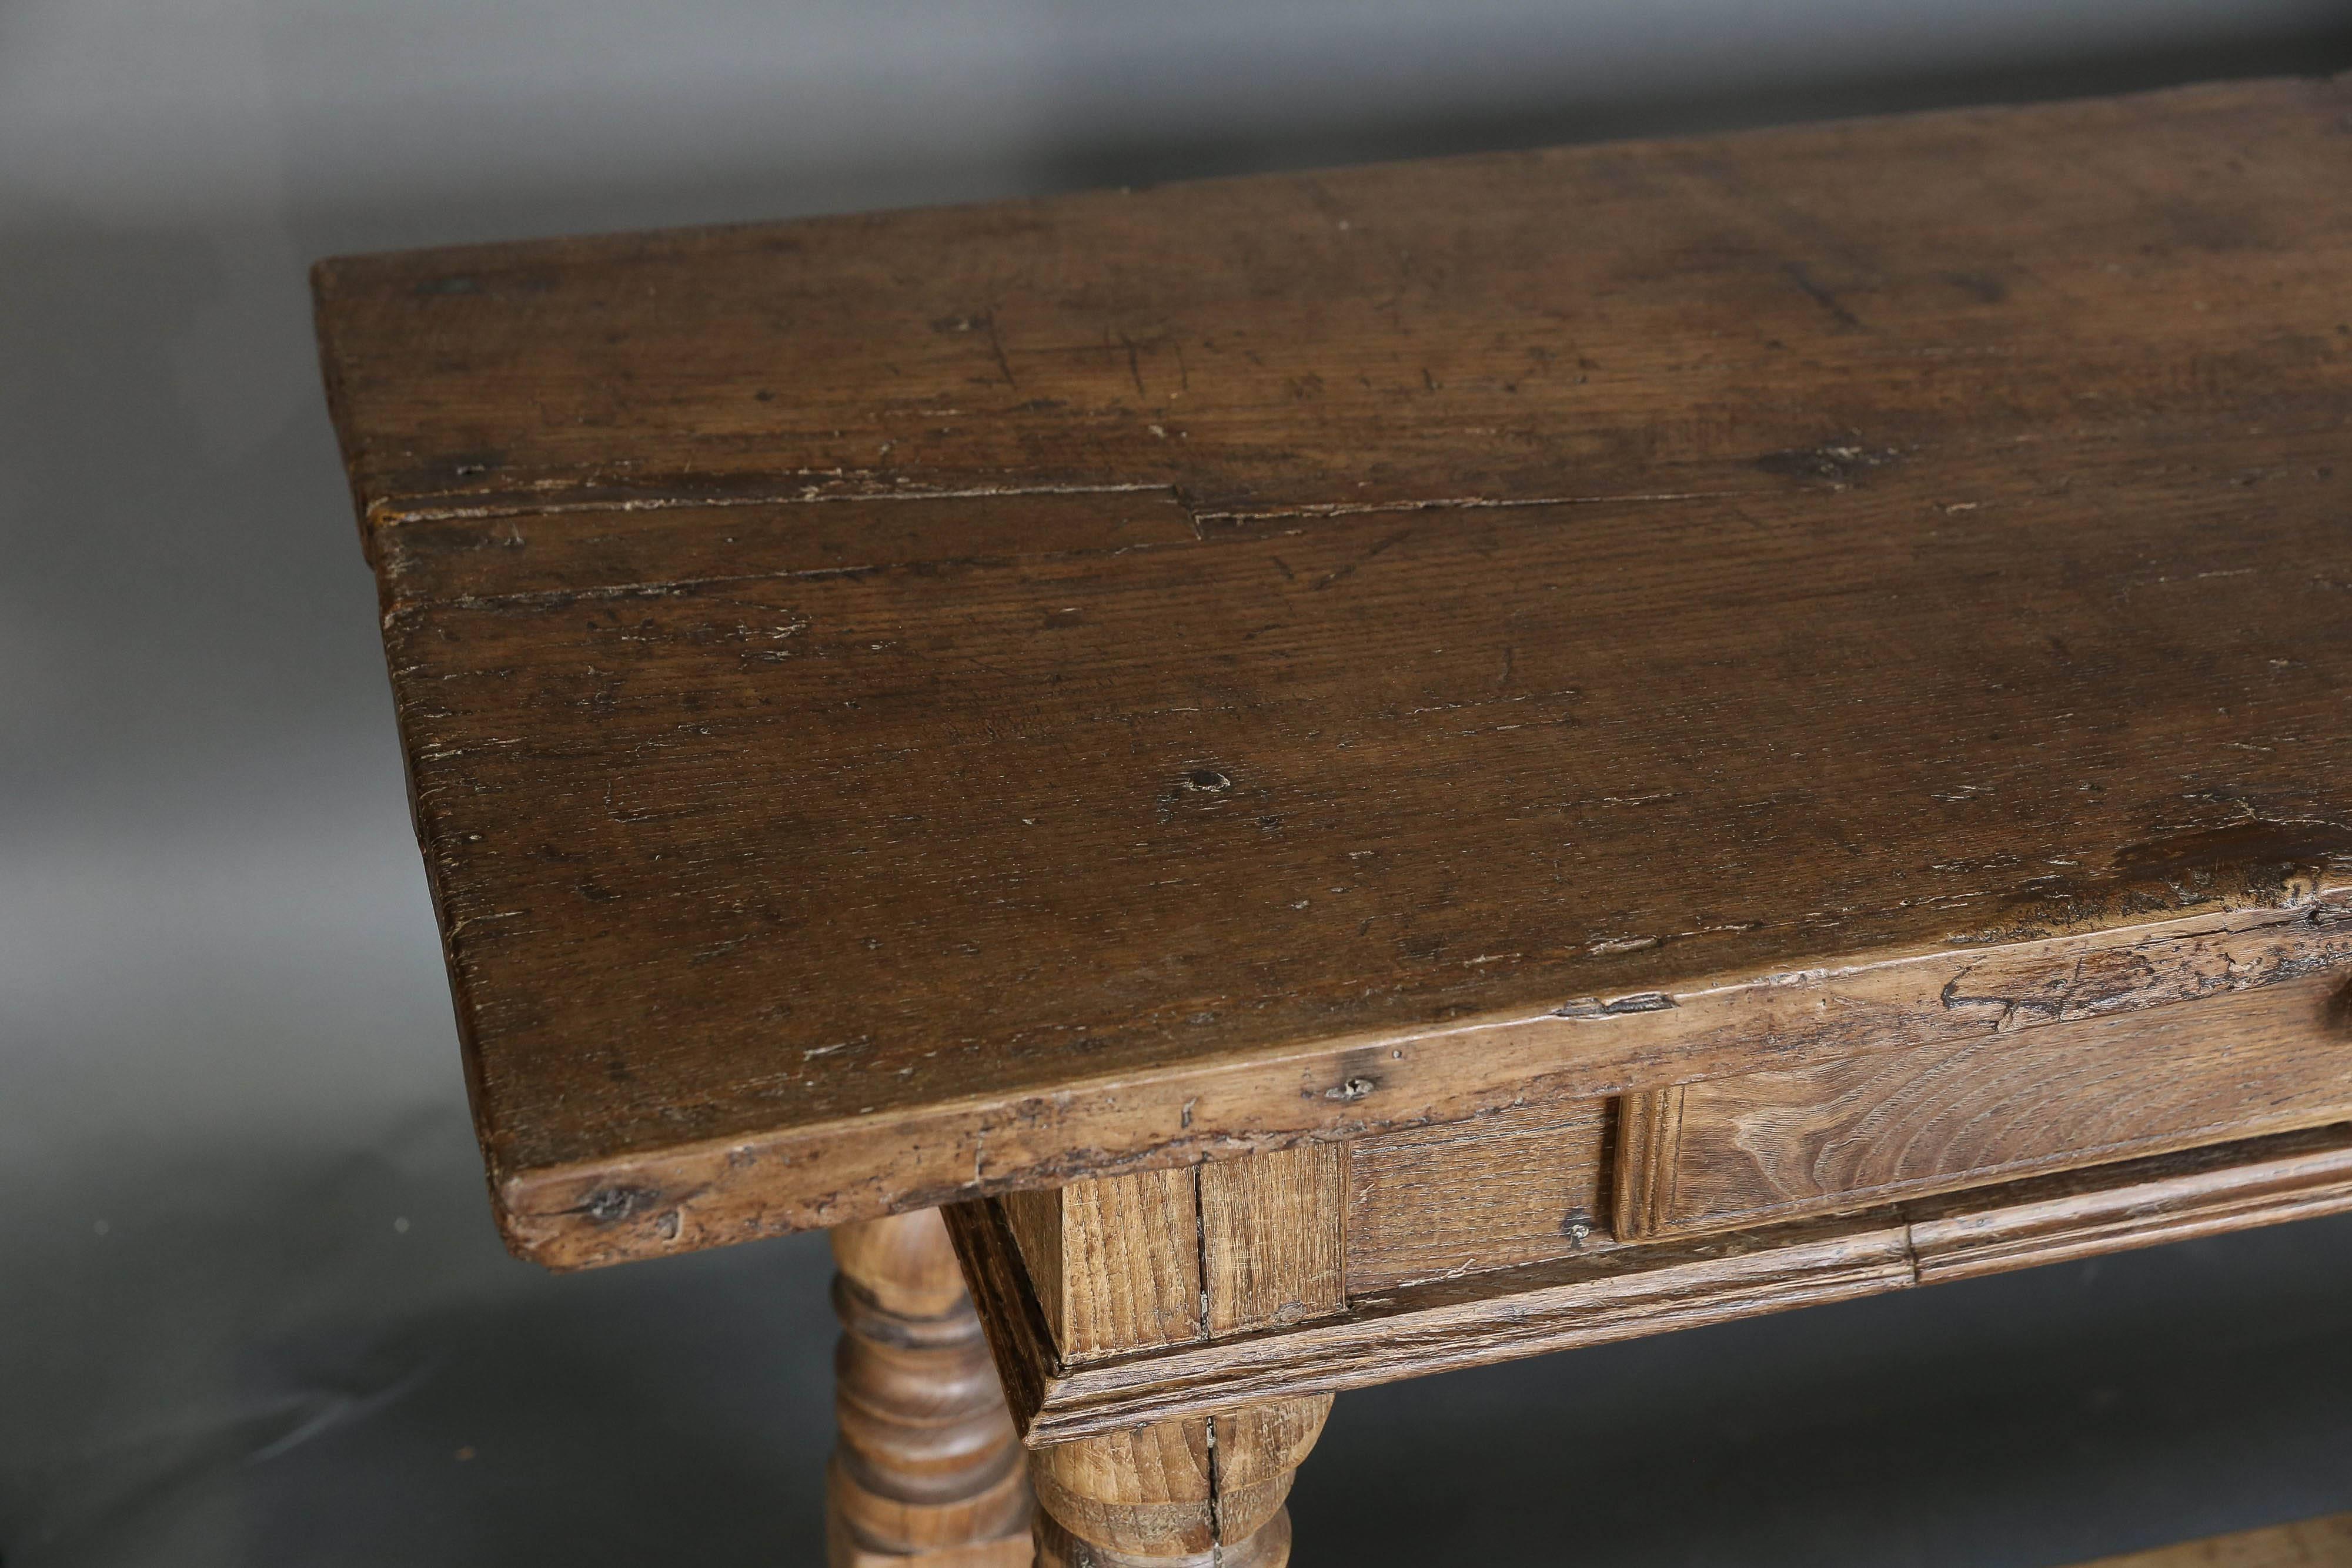 19th century Spanish chestnut table with a pair of drawers and wooden knobs. The top is a single plank.